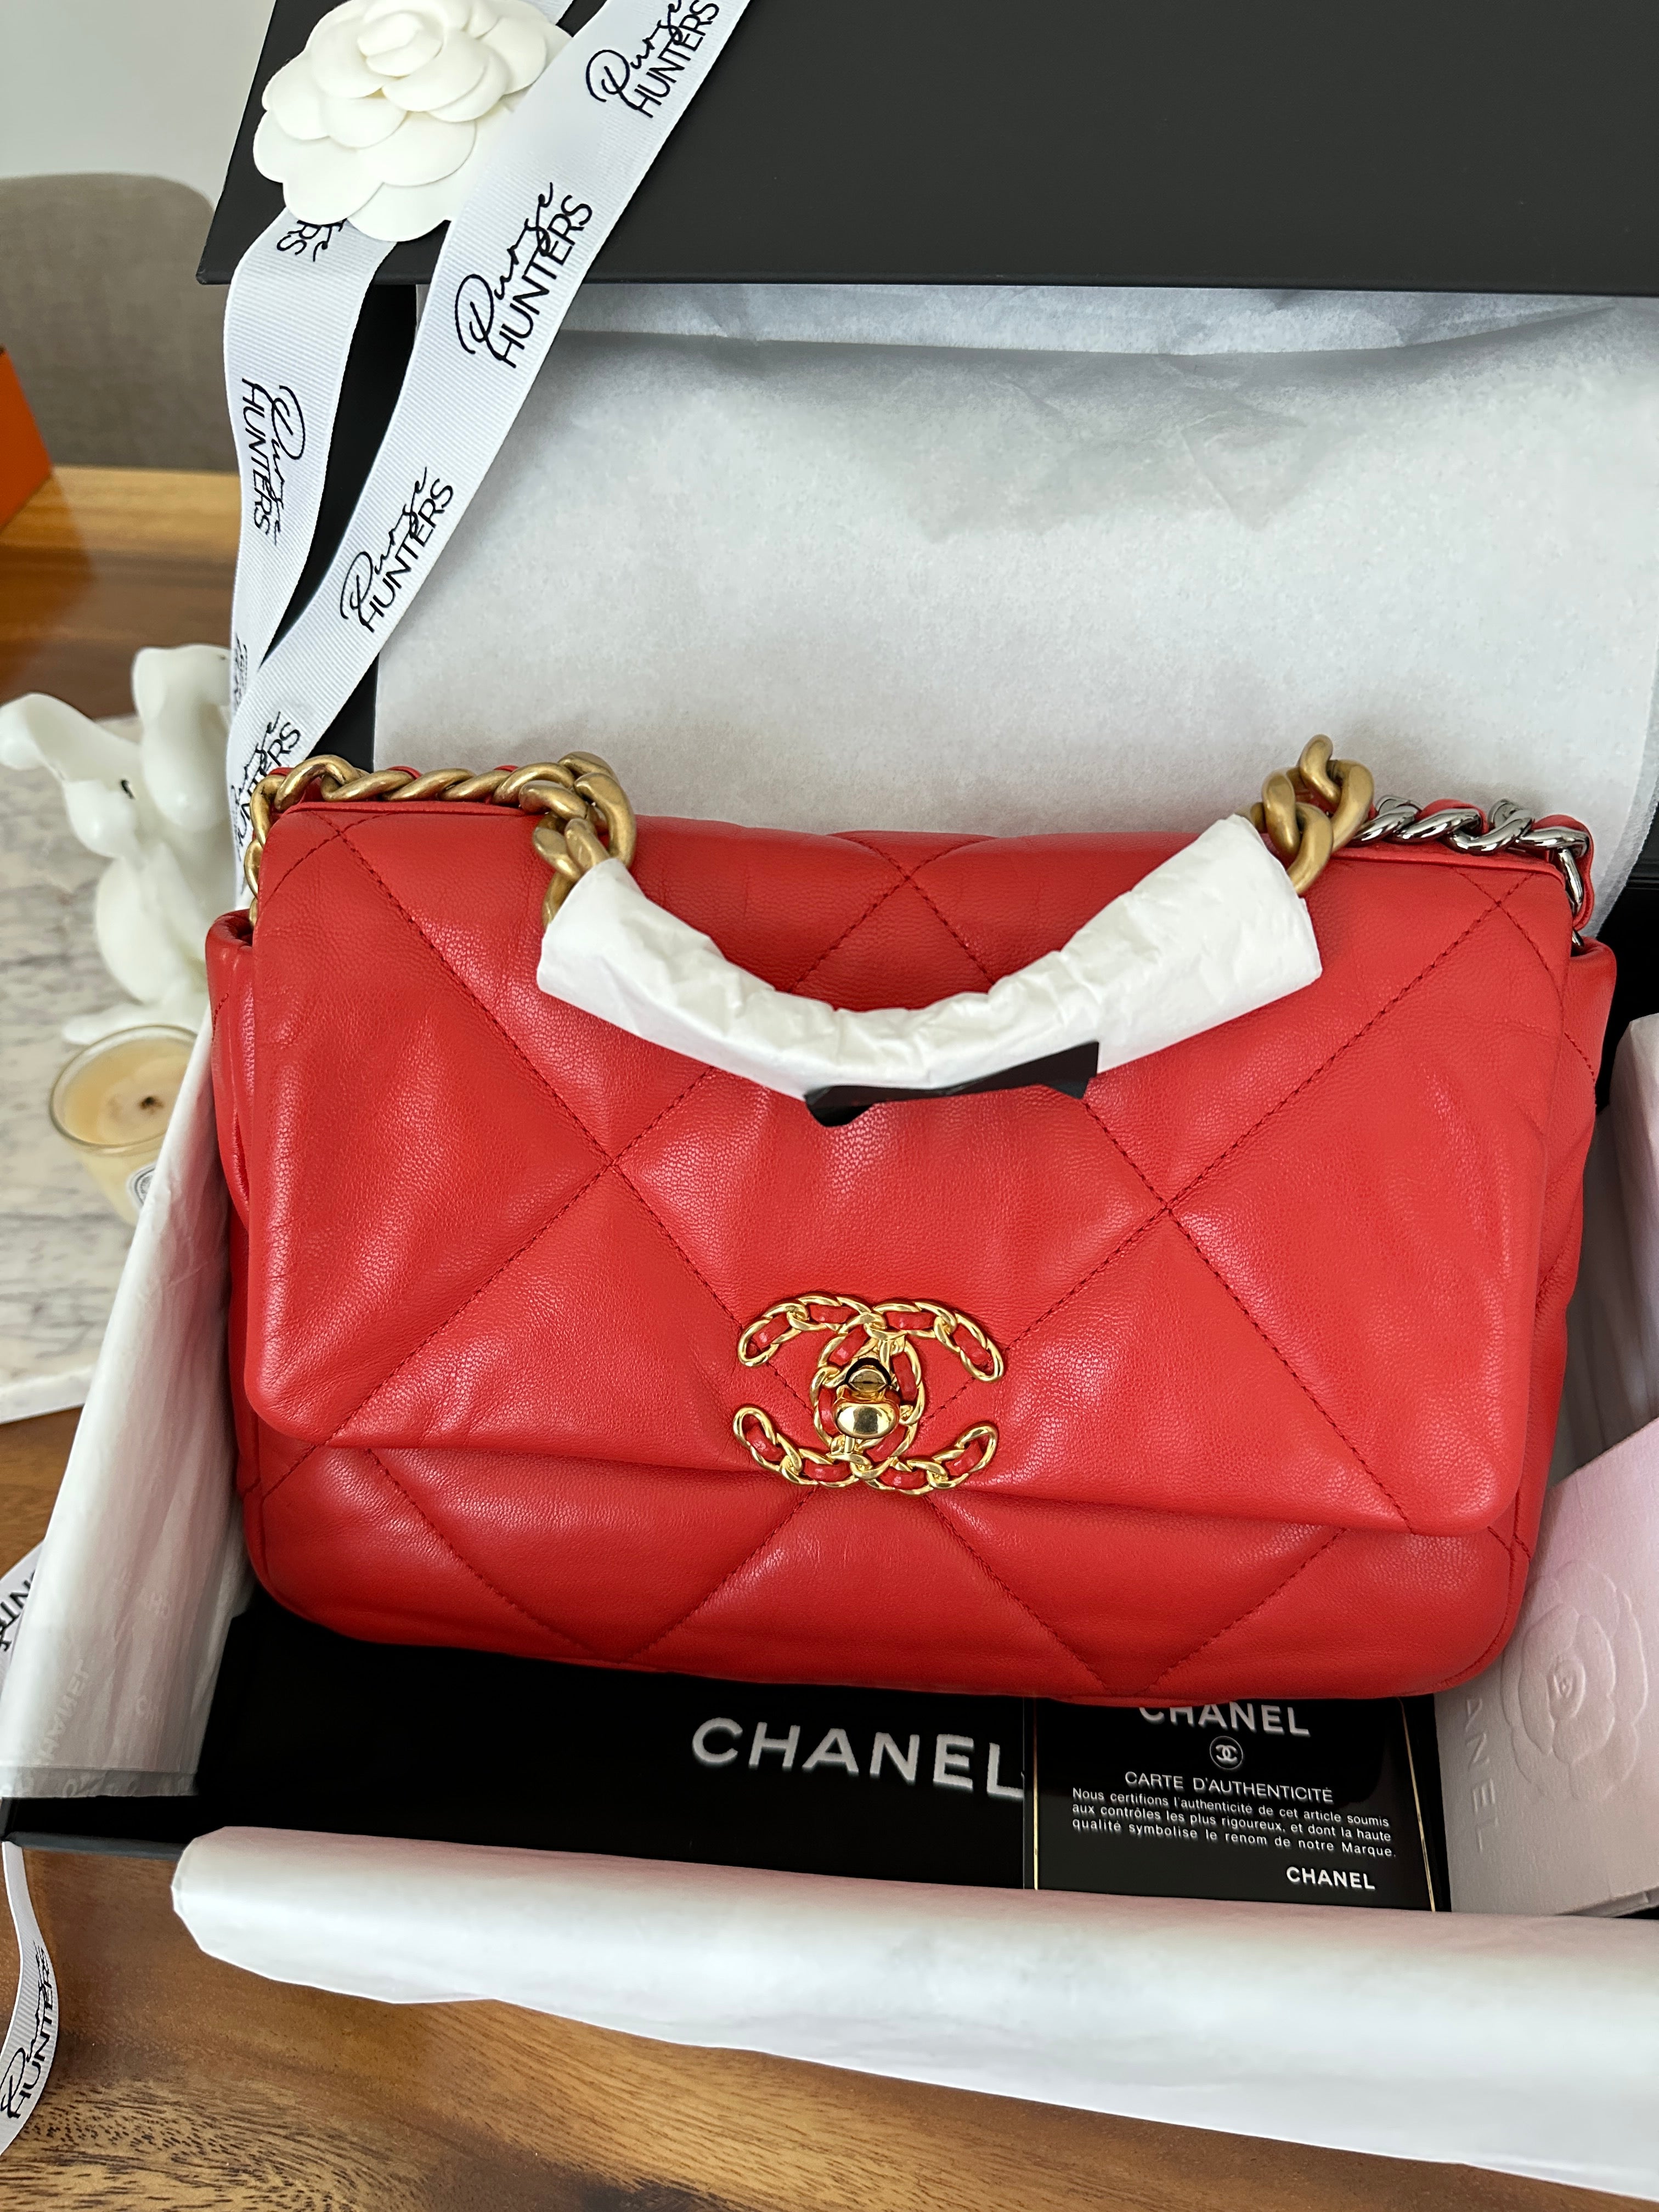 100% authentic CHANEL 19 Small Flap with mixed hardware